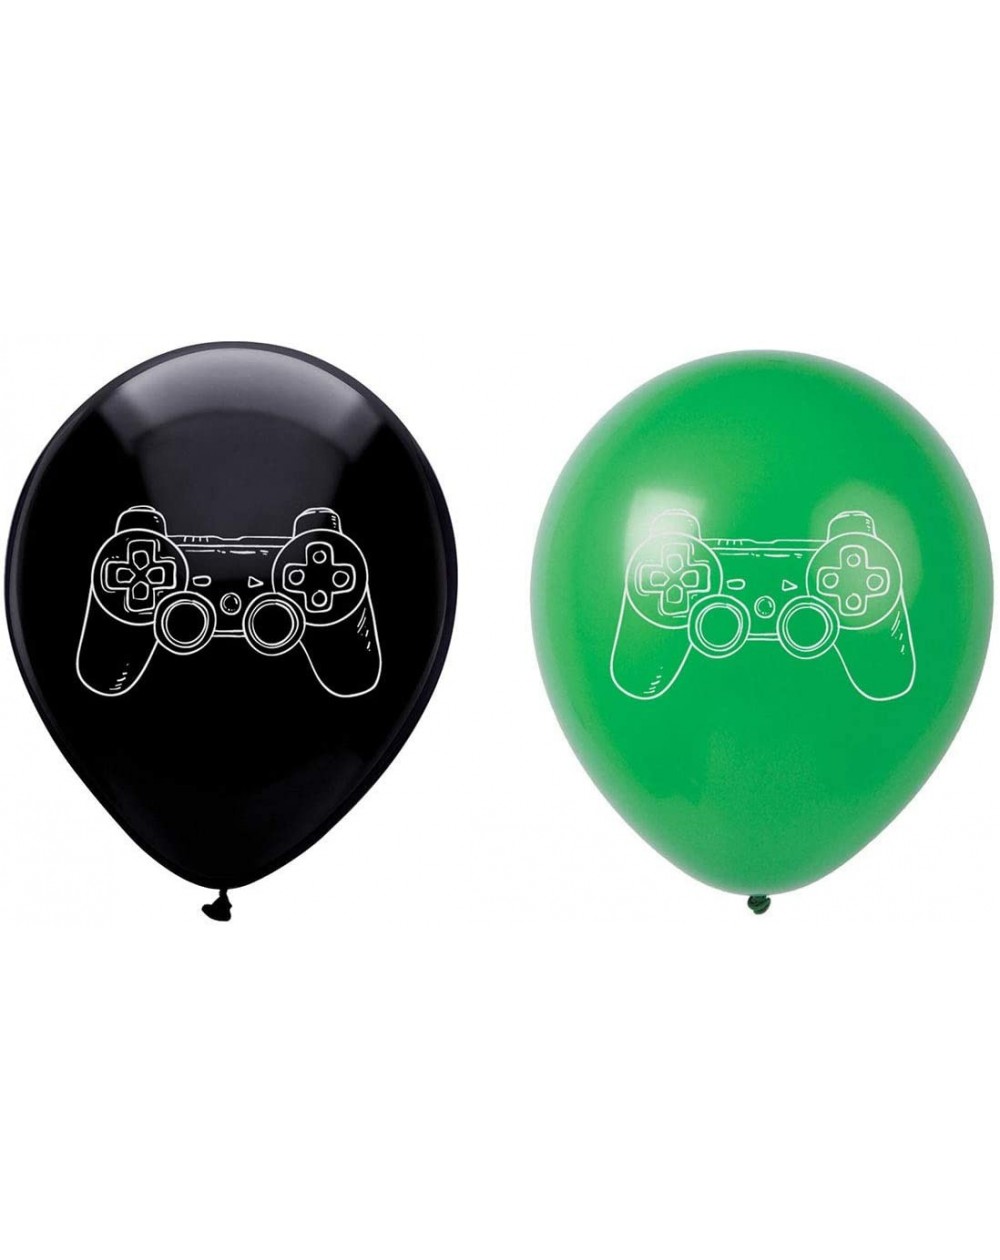 Balloons Video Game Latex Balloons- 16-Pack 12inch Gaming Birthday Party Decorations- Supplies - CP18SM7IQDX $16.71